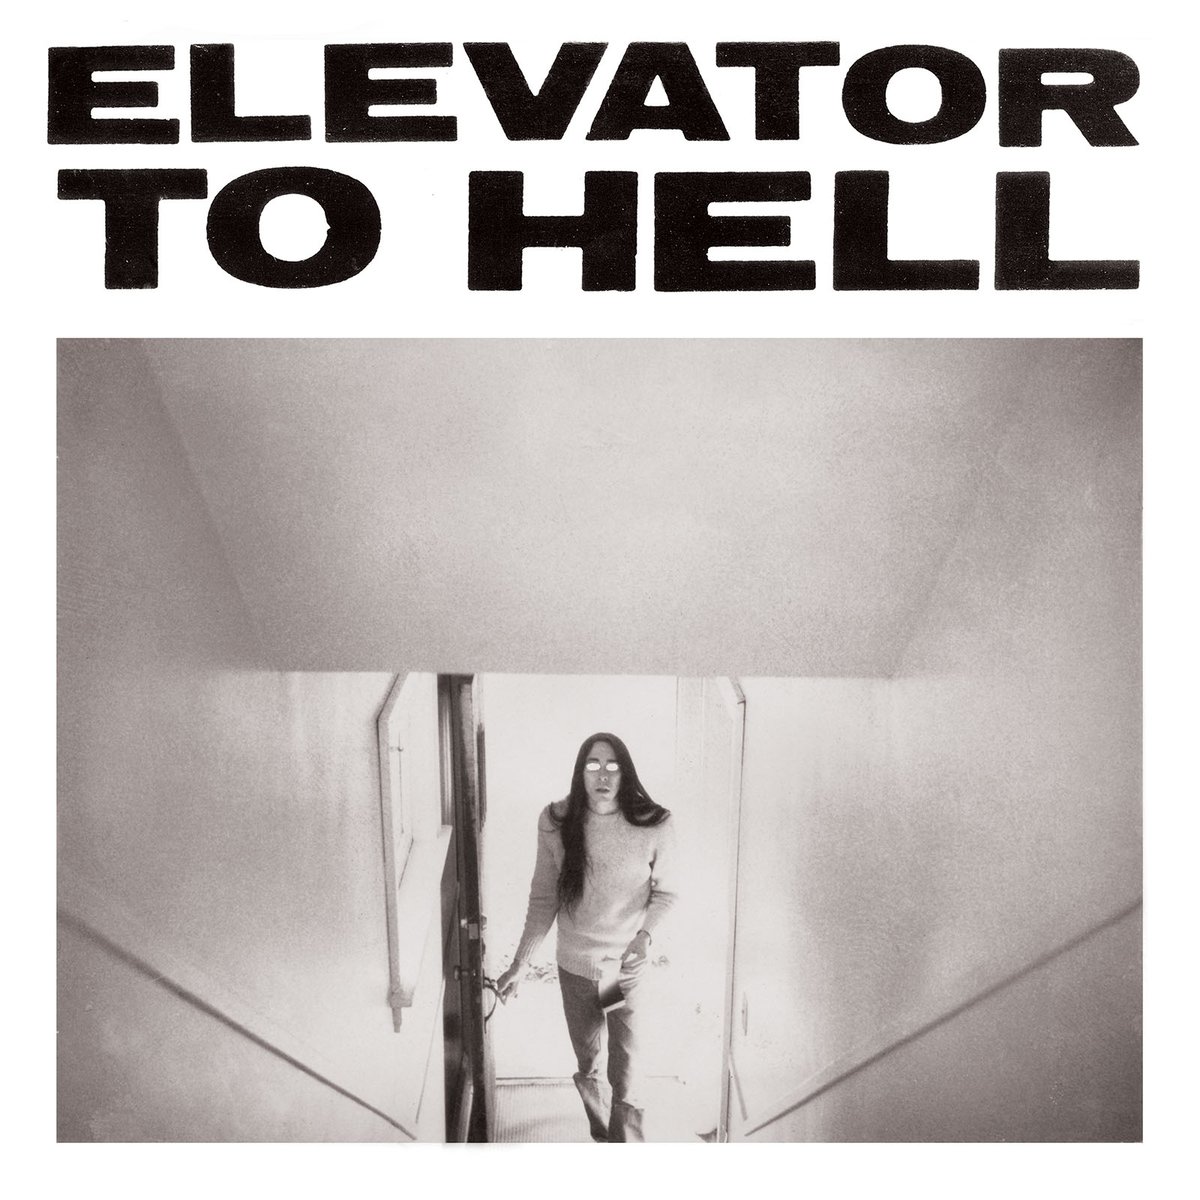 Image of ELEVATOR TO HELL  Parts 1-3 "Extra" 2xLP